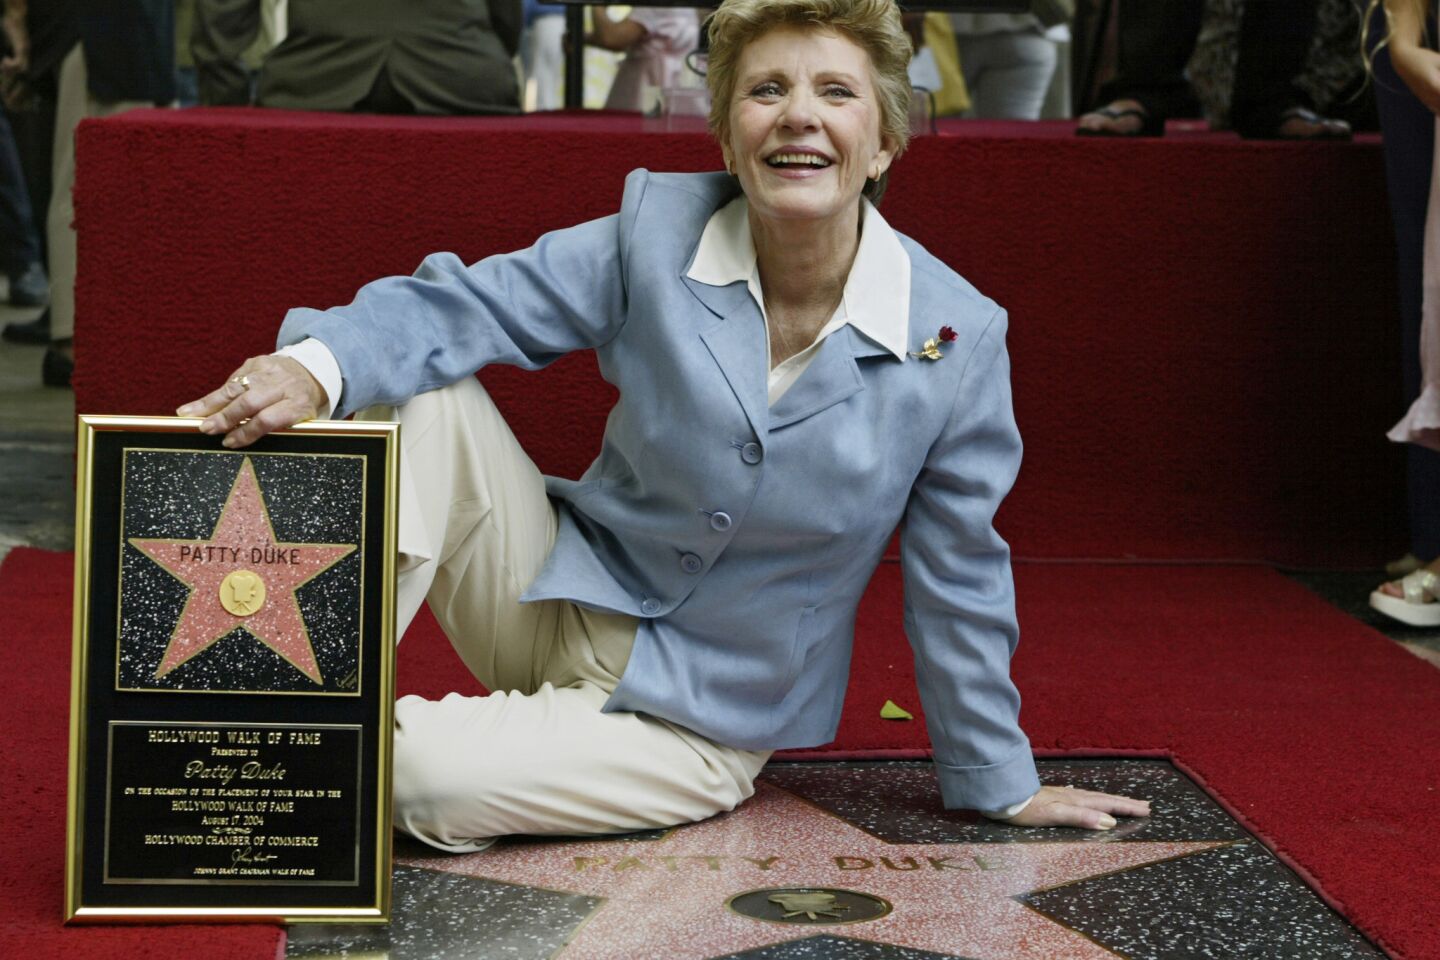 Patty Duke: Career in pictures